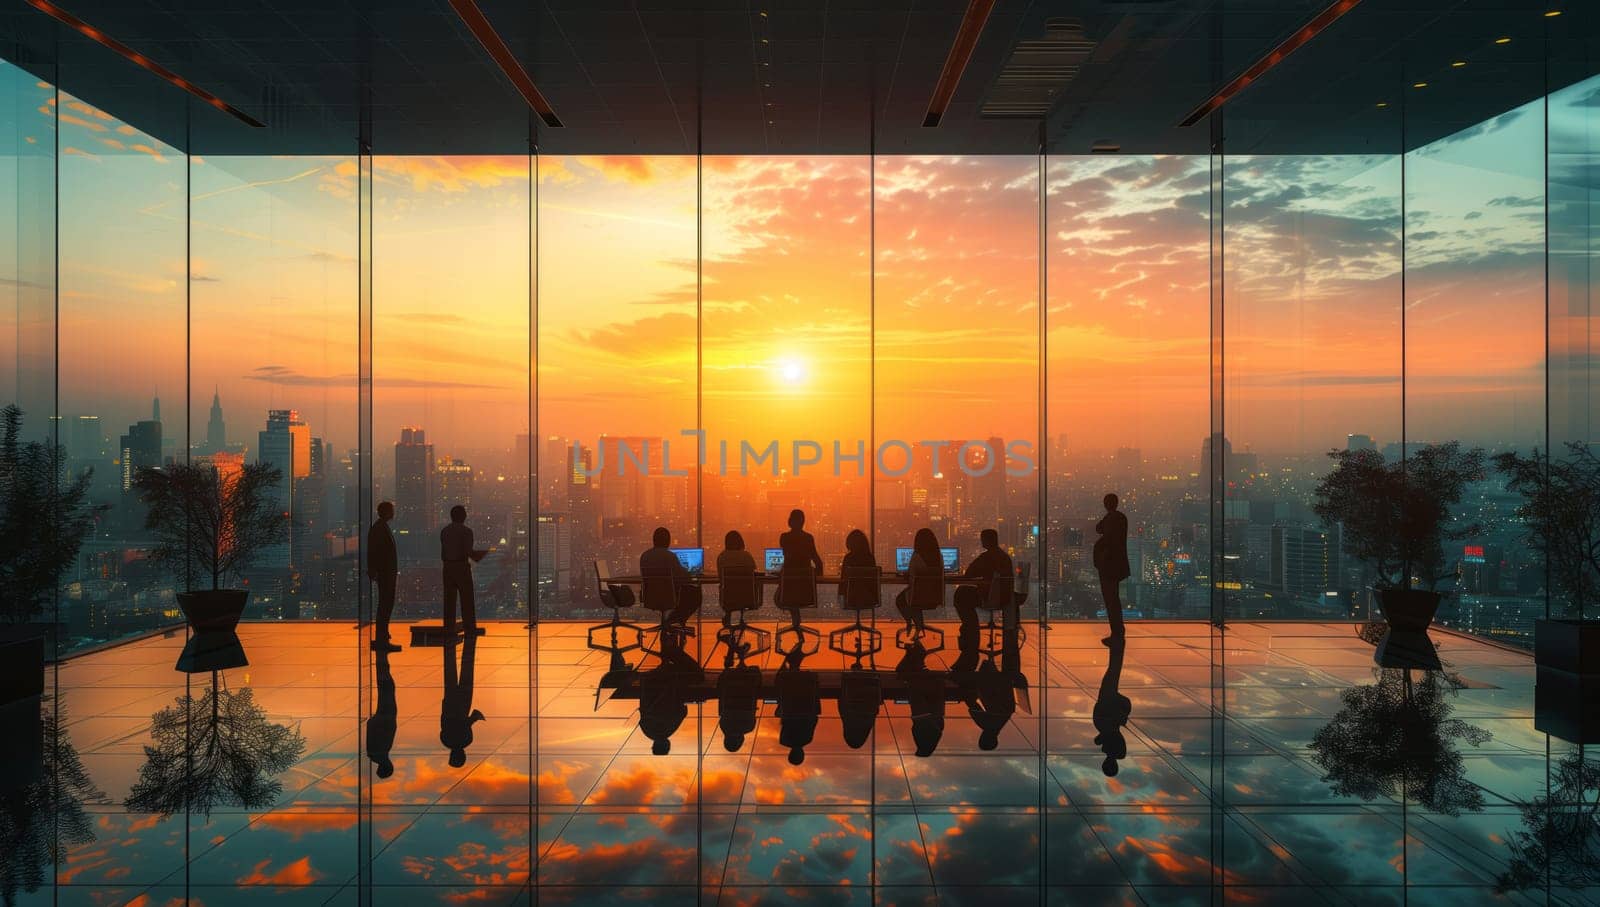 A group of people are enjoying the afterglow of the sunset at a table by the window, overlooking the city skyline against the backdrop of the horizon